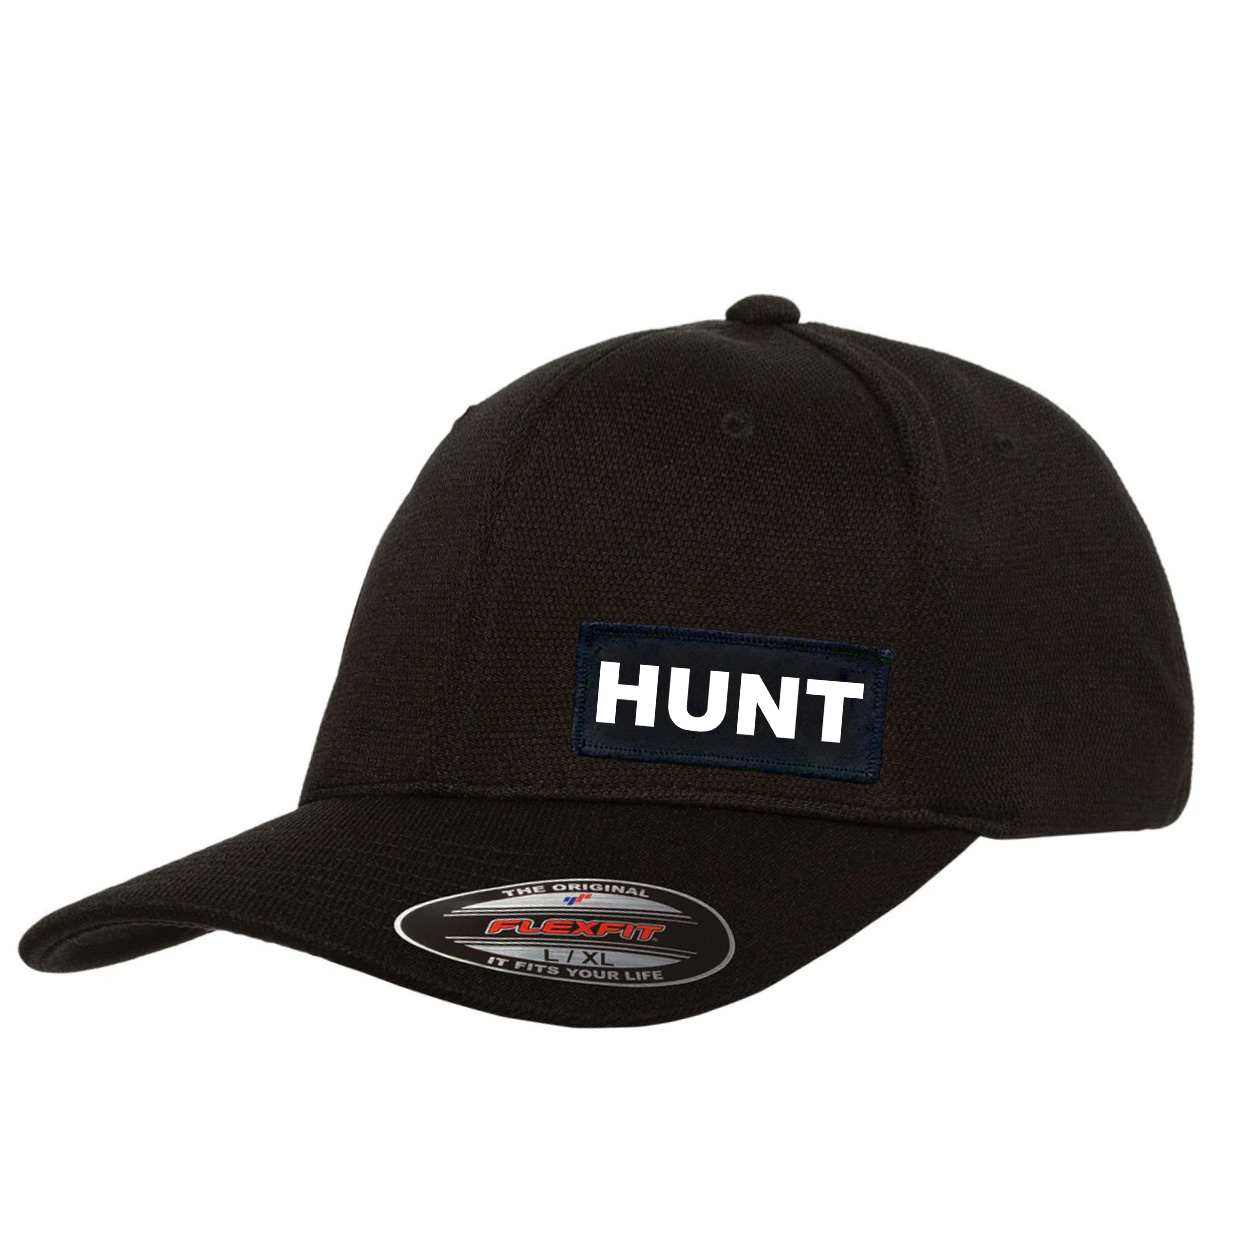 Hunt Brand Logo Night Out Woven Patch Flex-Fit Hat Black (White Logo)